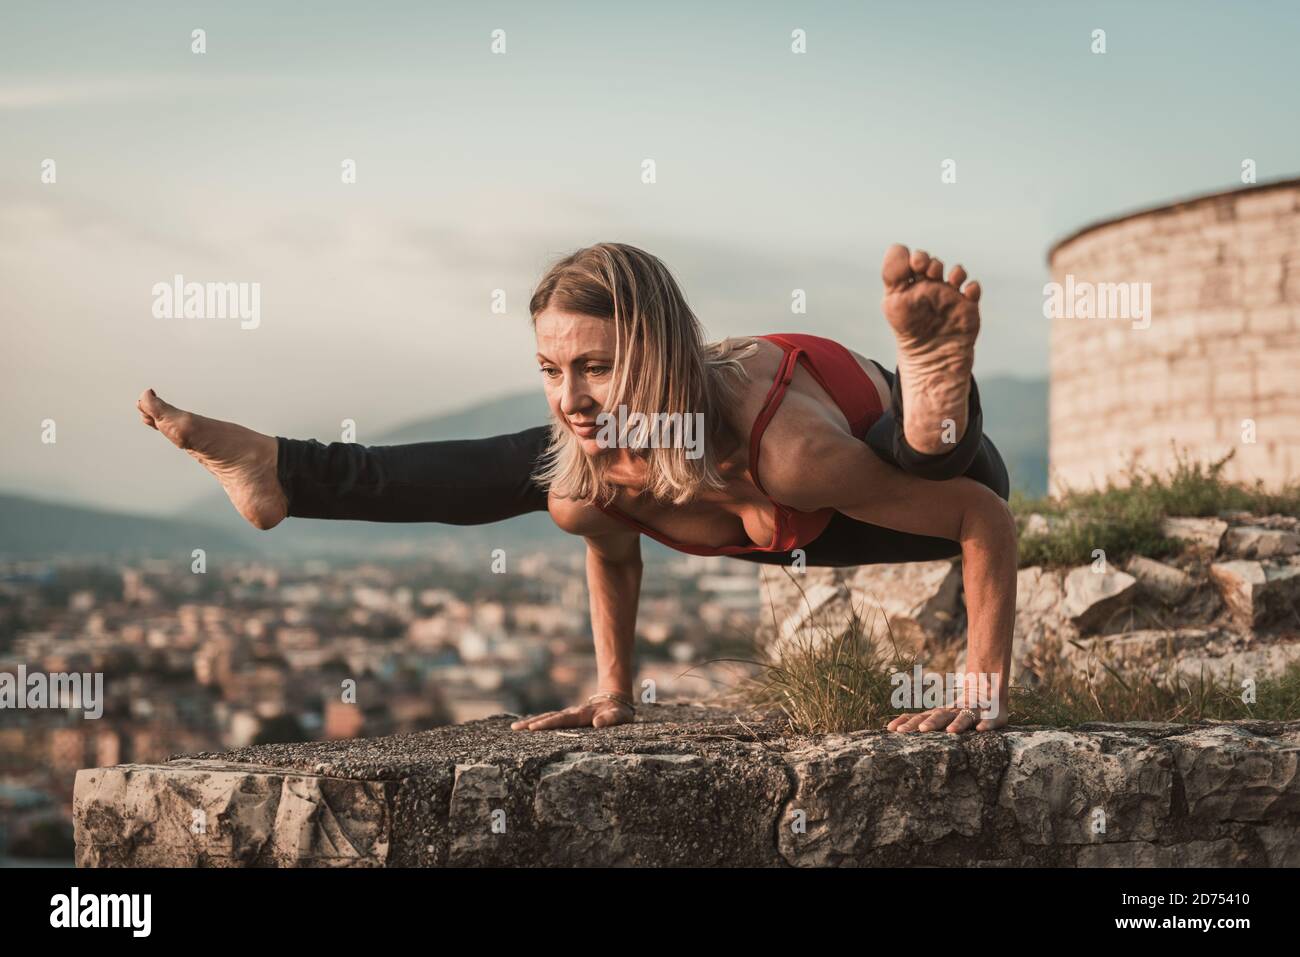 Adult woman does sports exercise. Yoga teacher doing an asana on the old city wall. Stock Photo